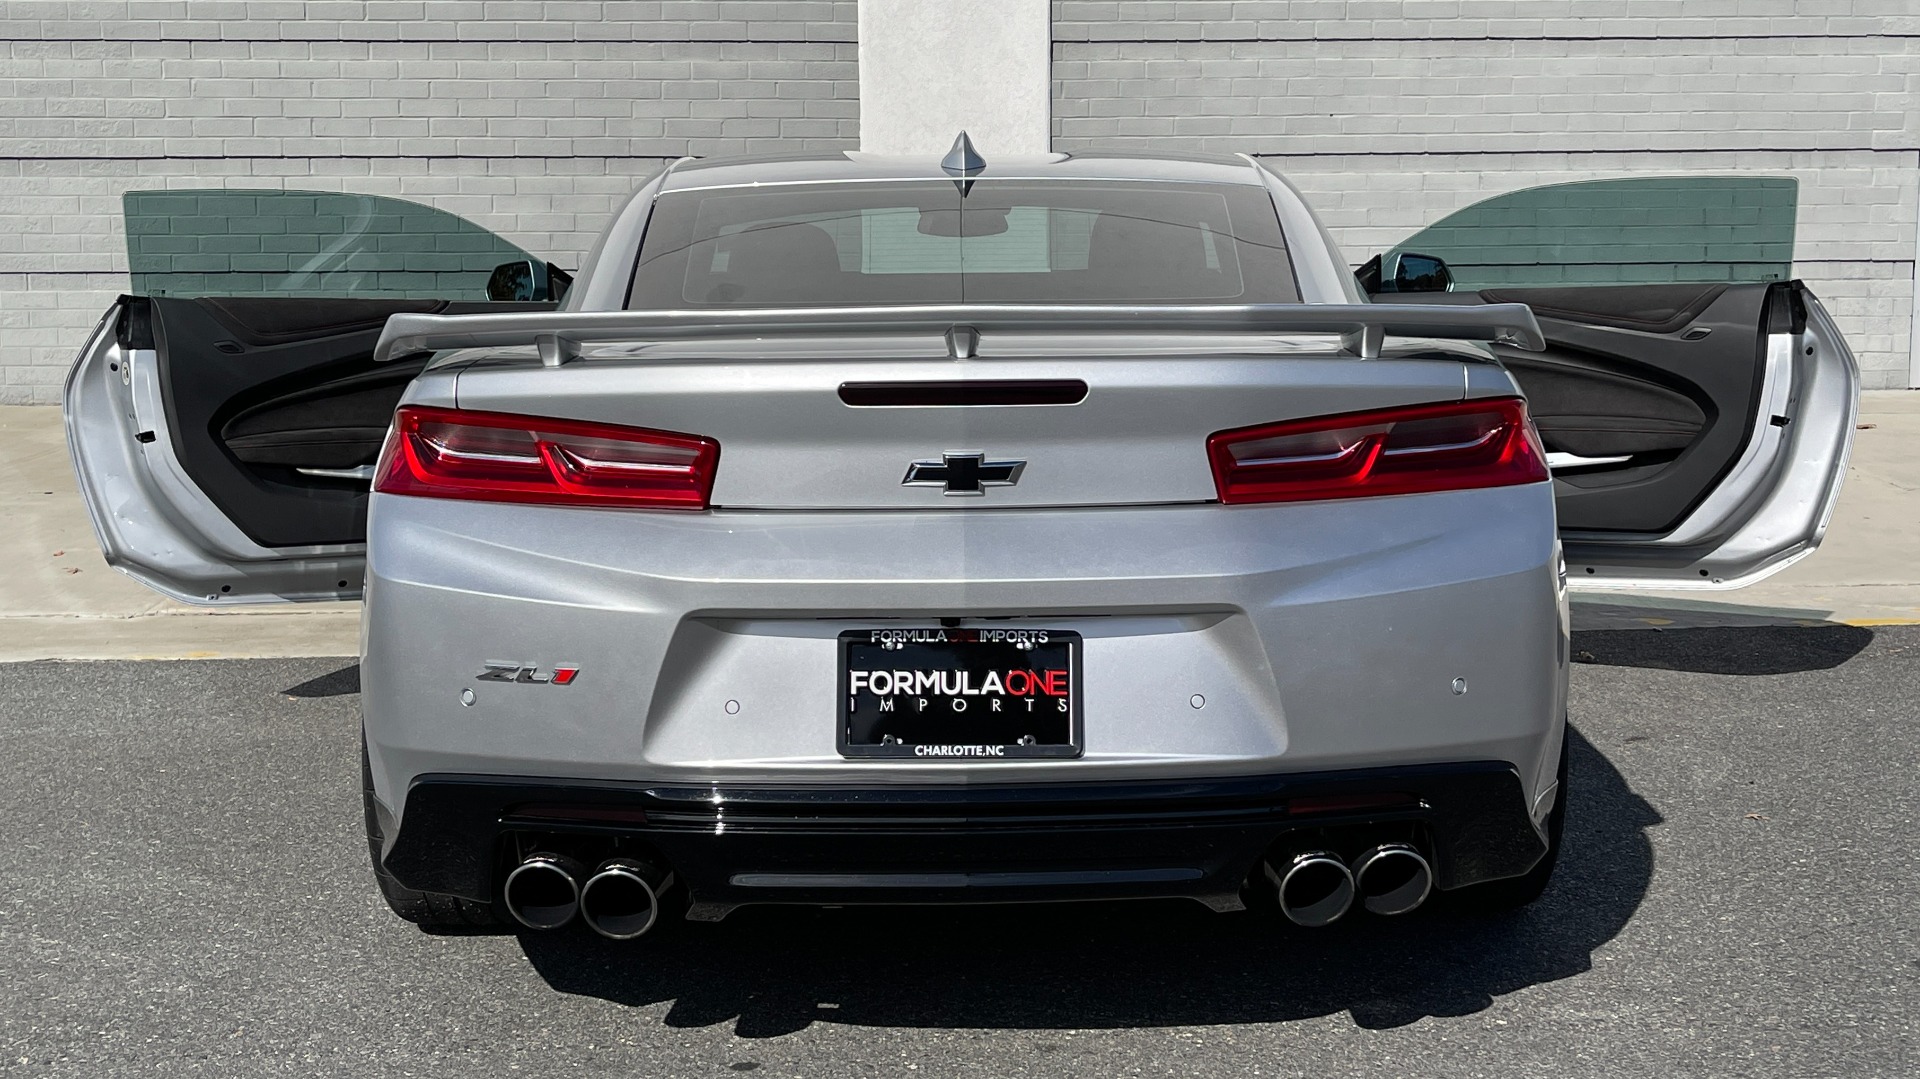 Used 2017 Chevrolet CAMARO ZL1 2DR COUPE / 650HP 6.2L SUPERCHARGED V8 / NAV / REARVIEW for sale Sold at Formula Imports in Charlotte NC 28227 7